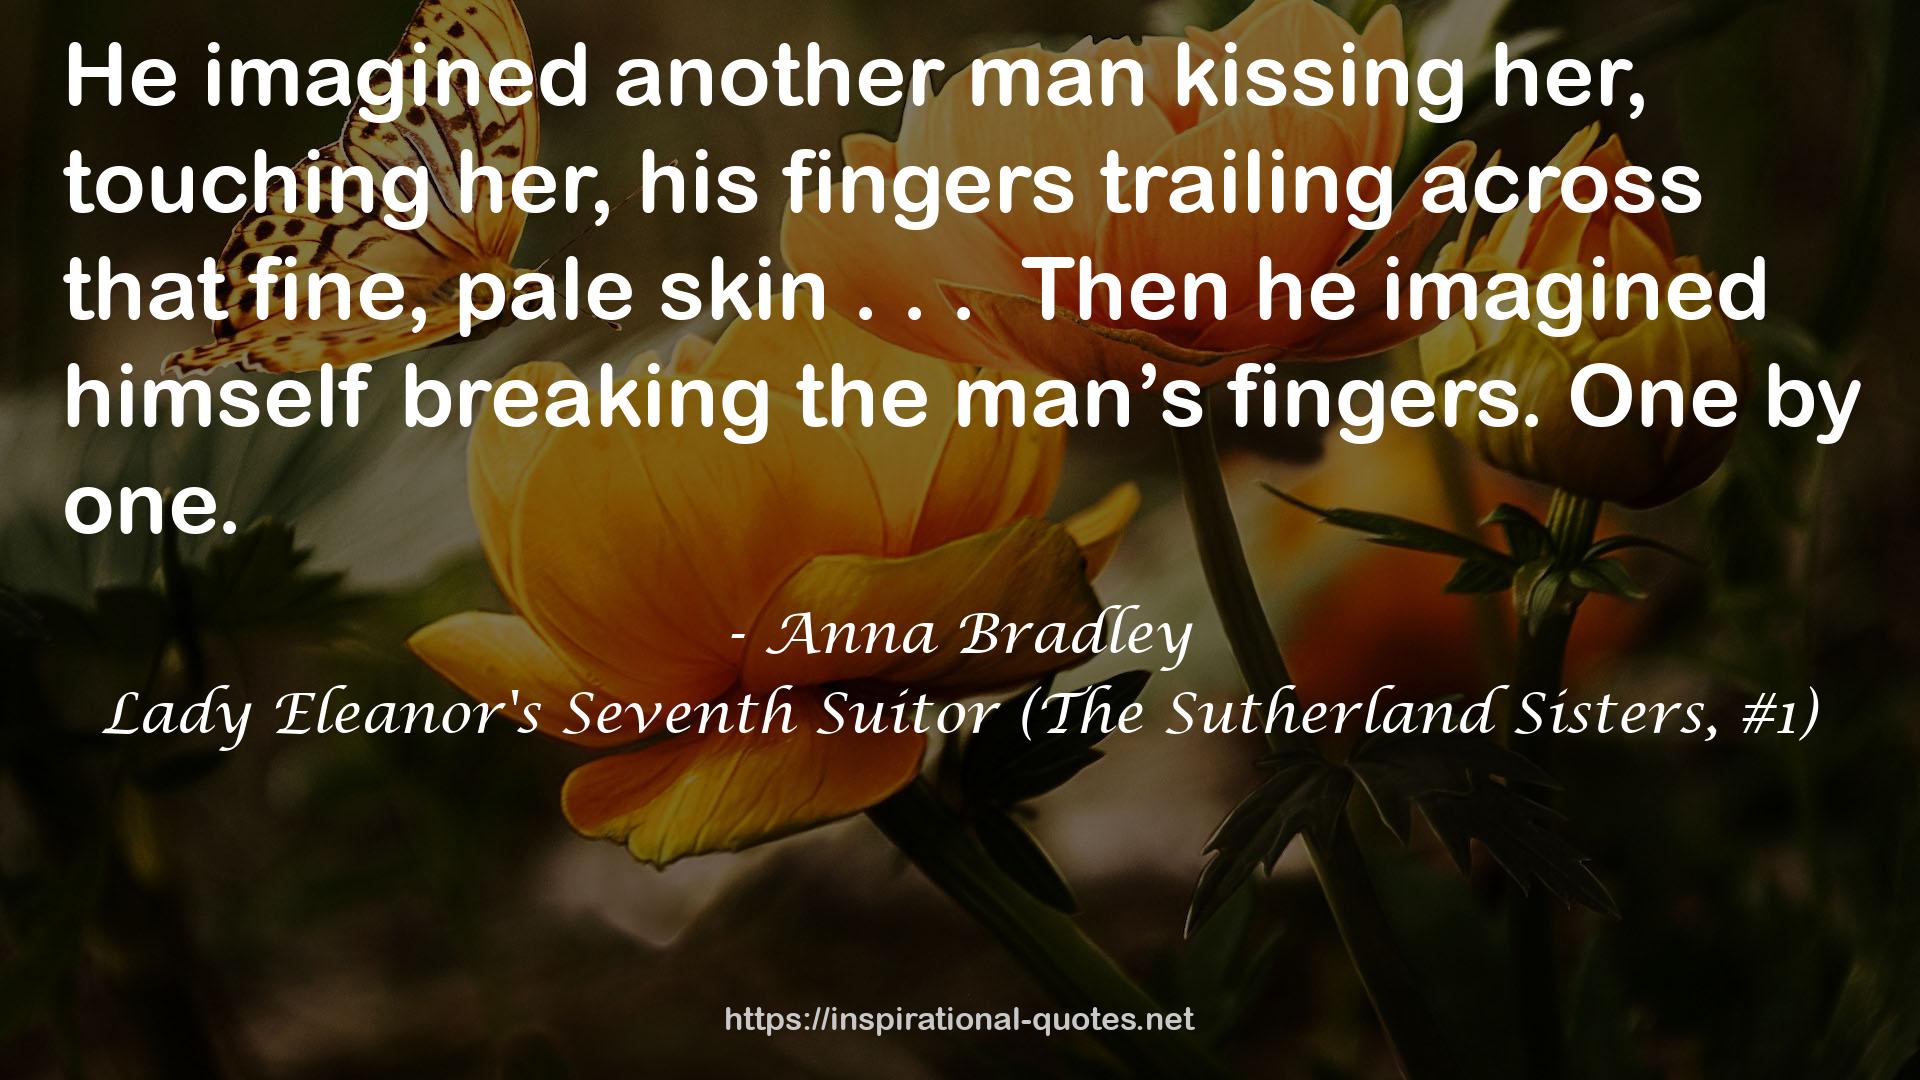 Lady Eleanor's Seventh Suitor (The Sutherland Sisters, #1) QUOTES